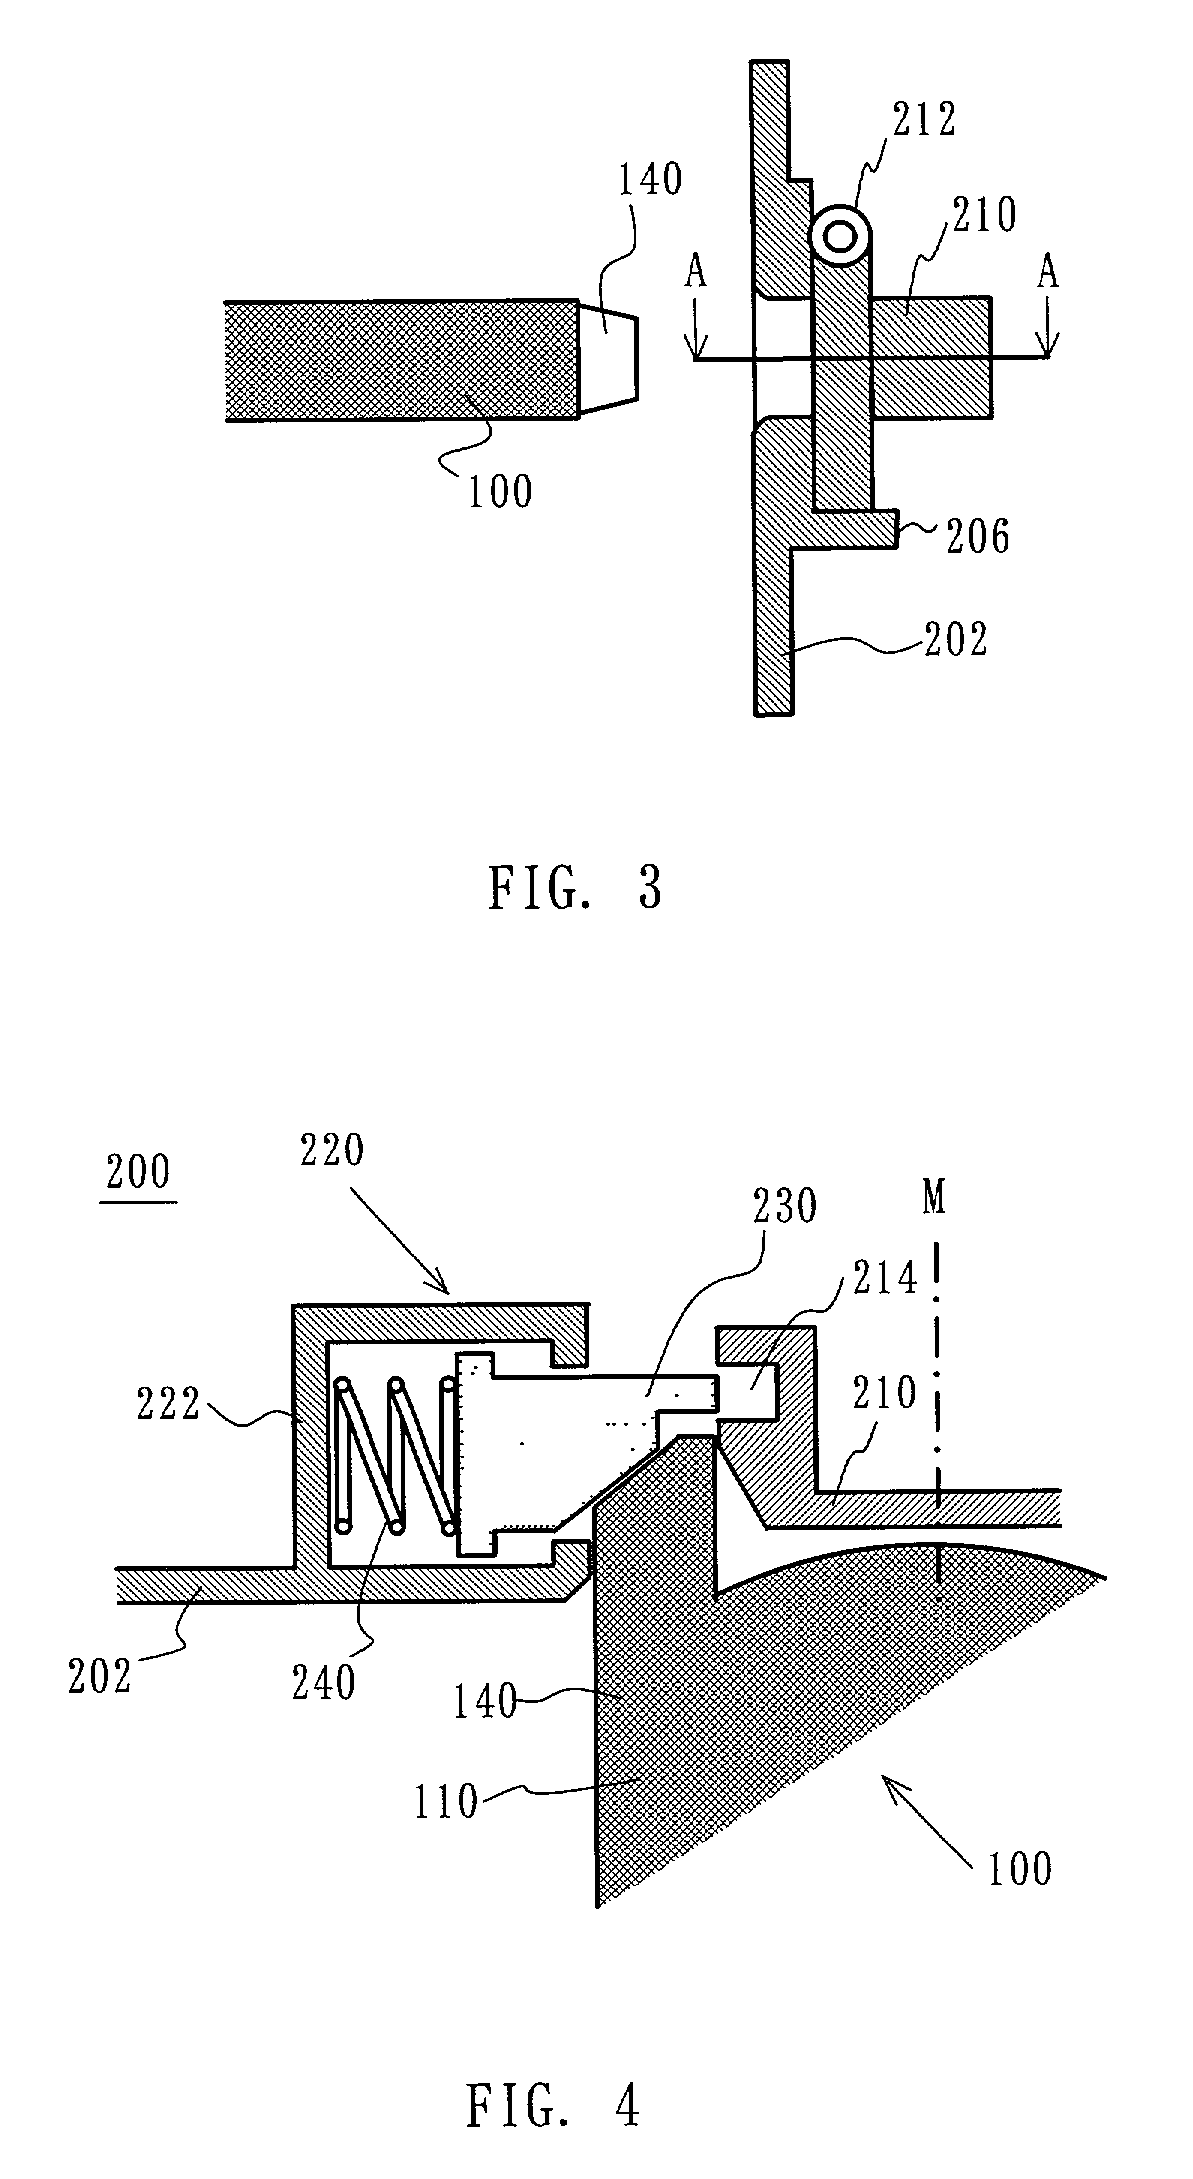 Cartridge and drive unit for preventing erroneous insertions of the cartridge